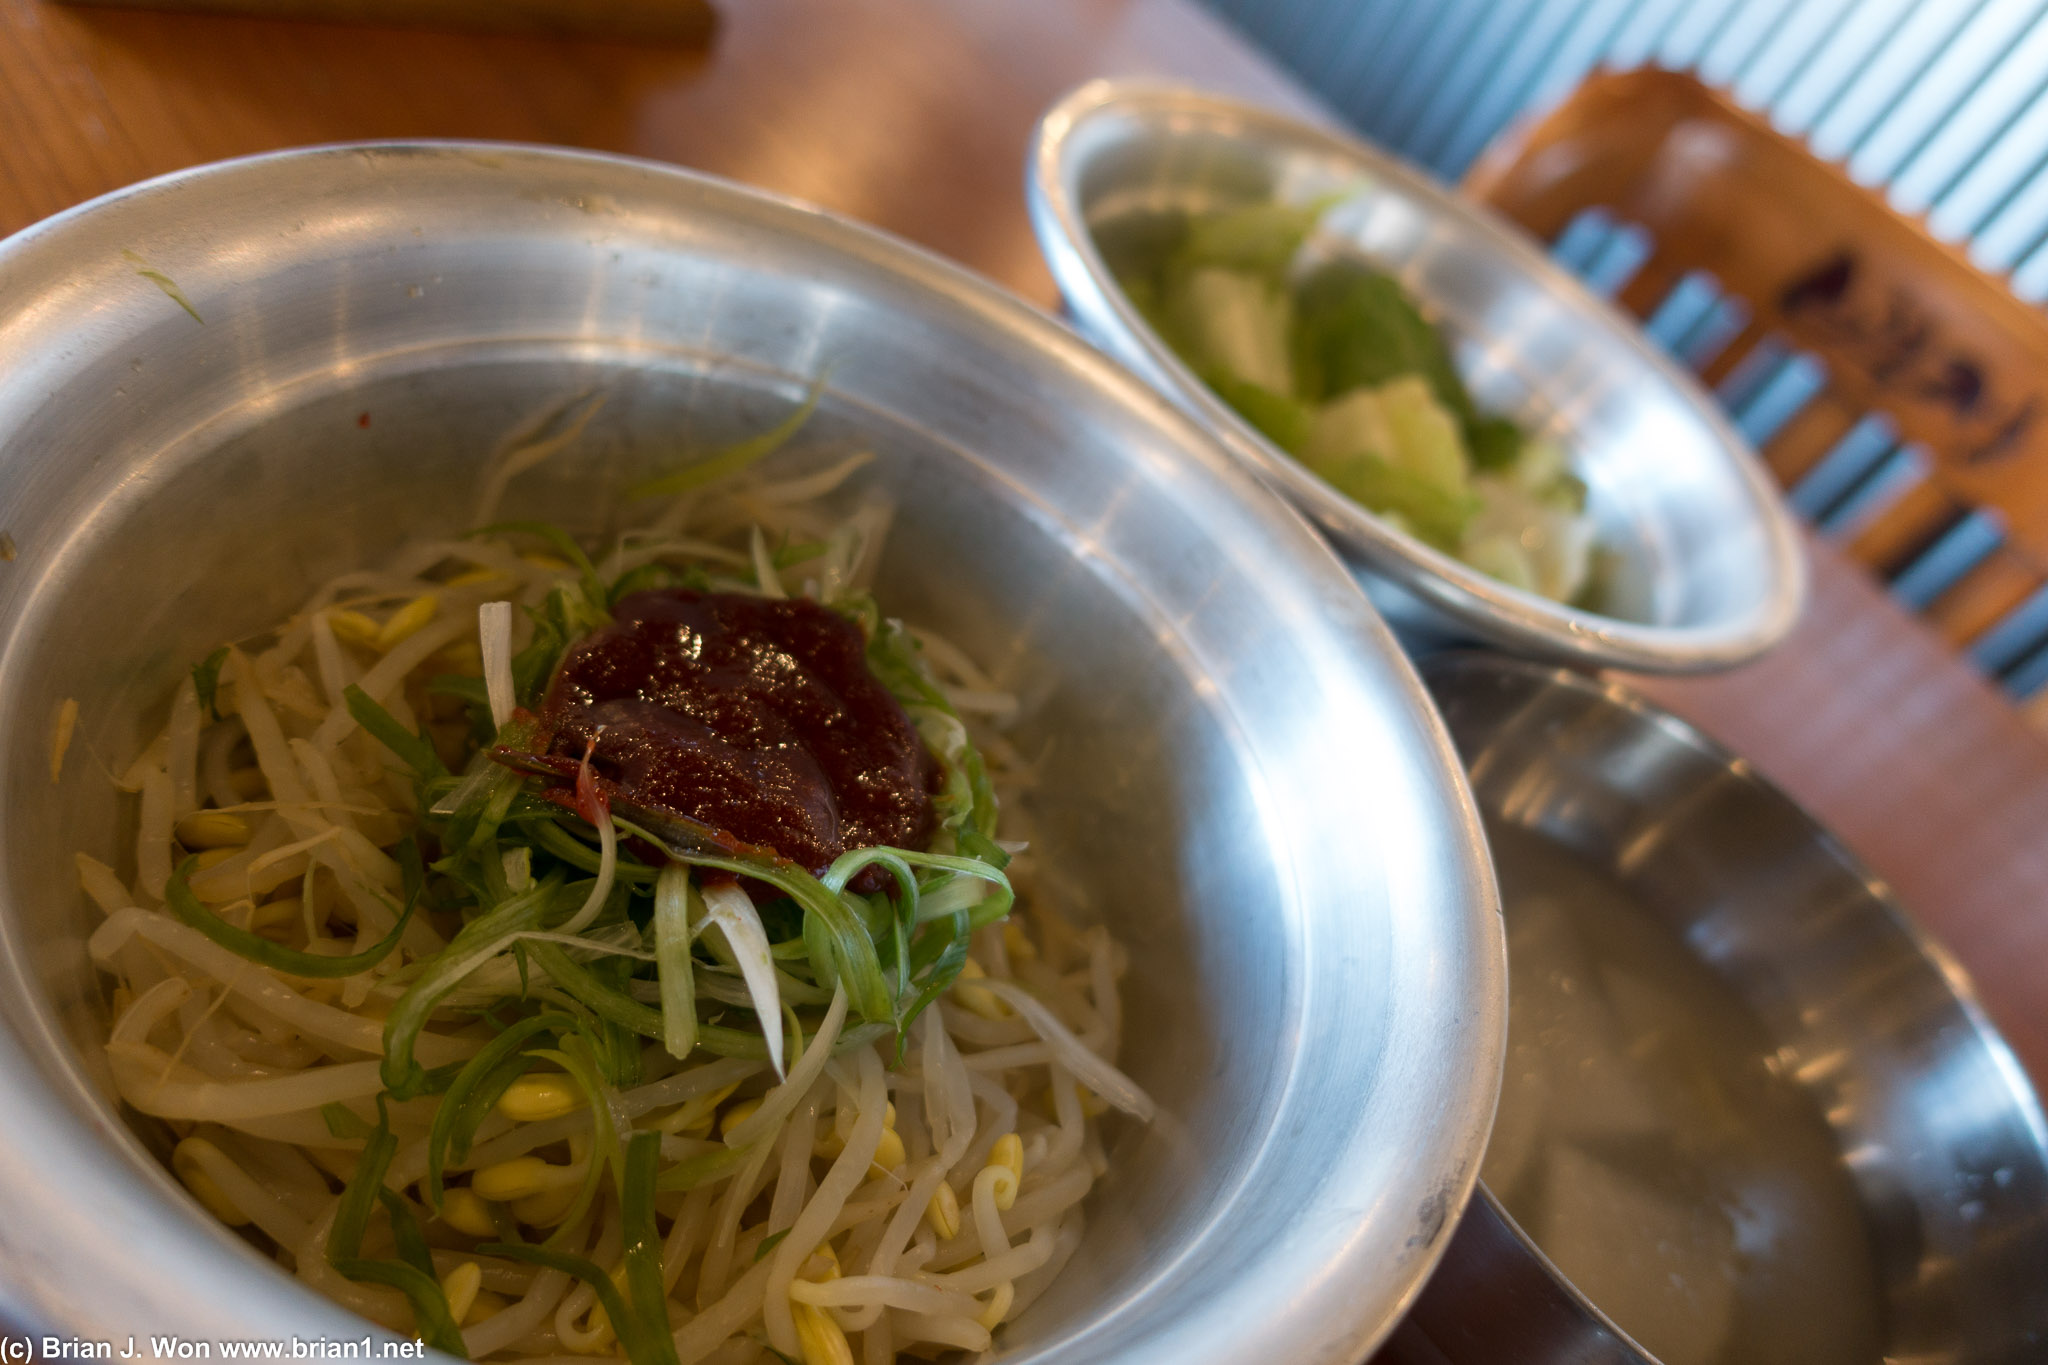 Bean sprouts and green onion salad.